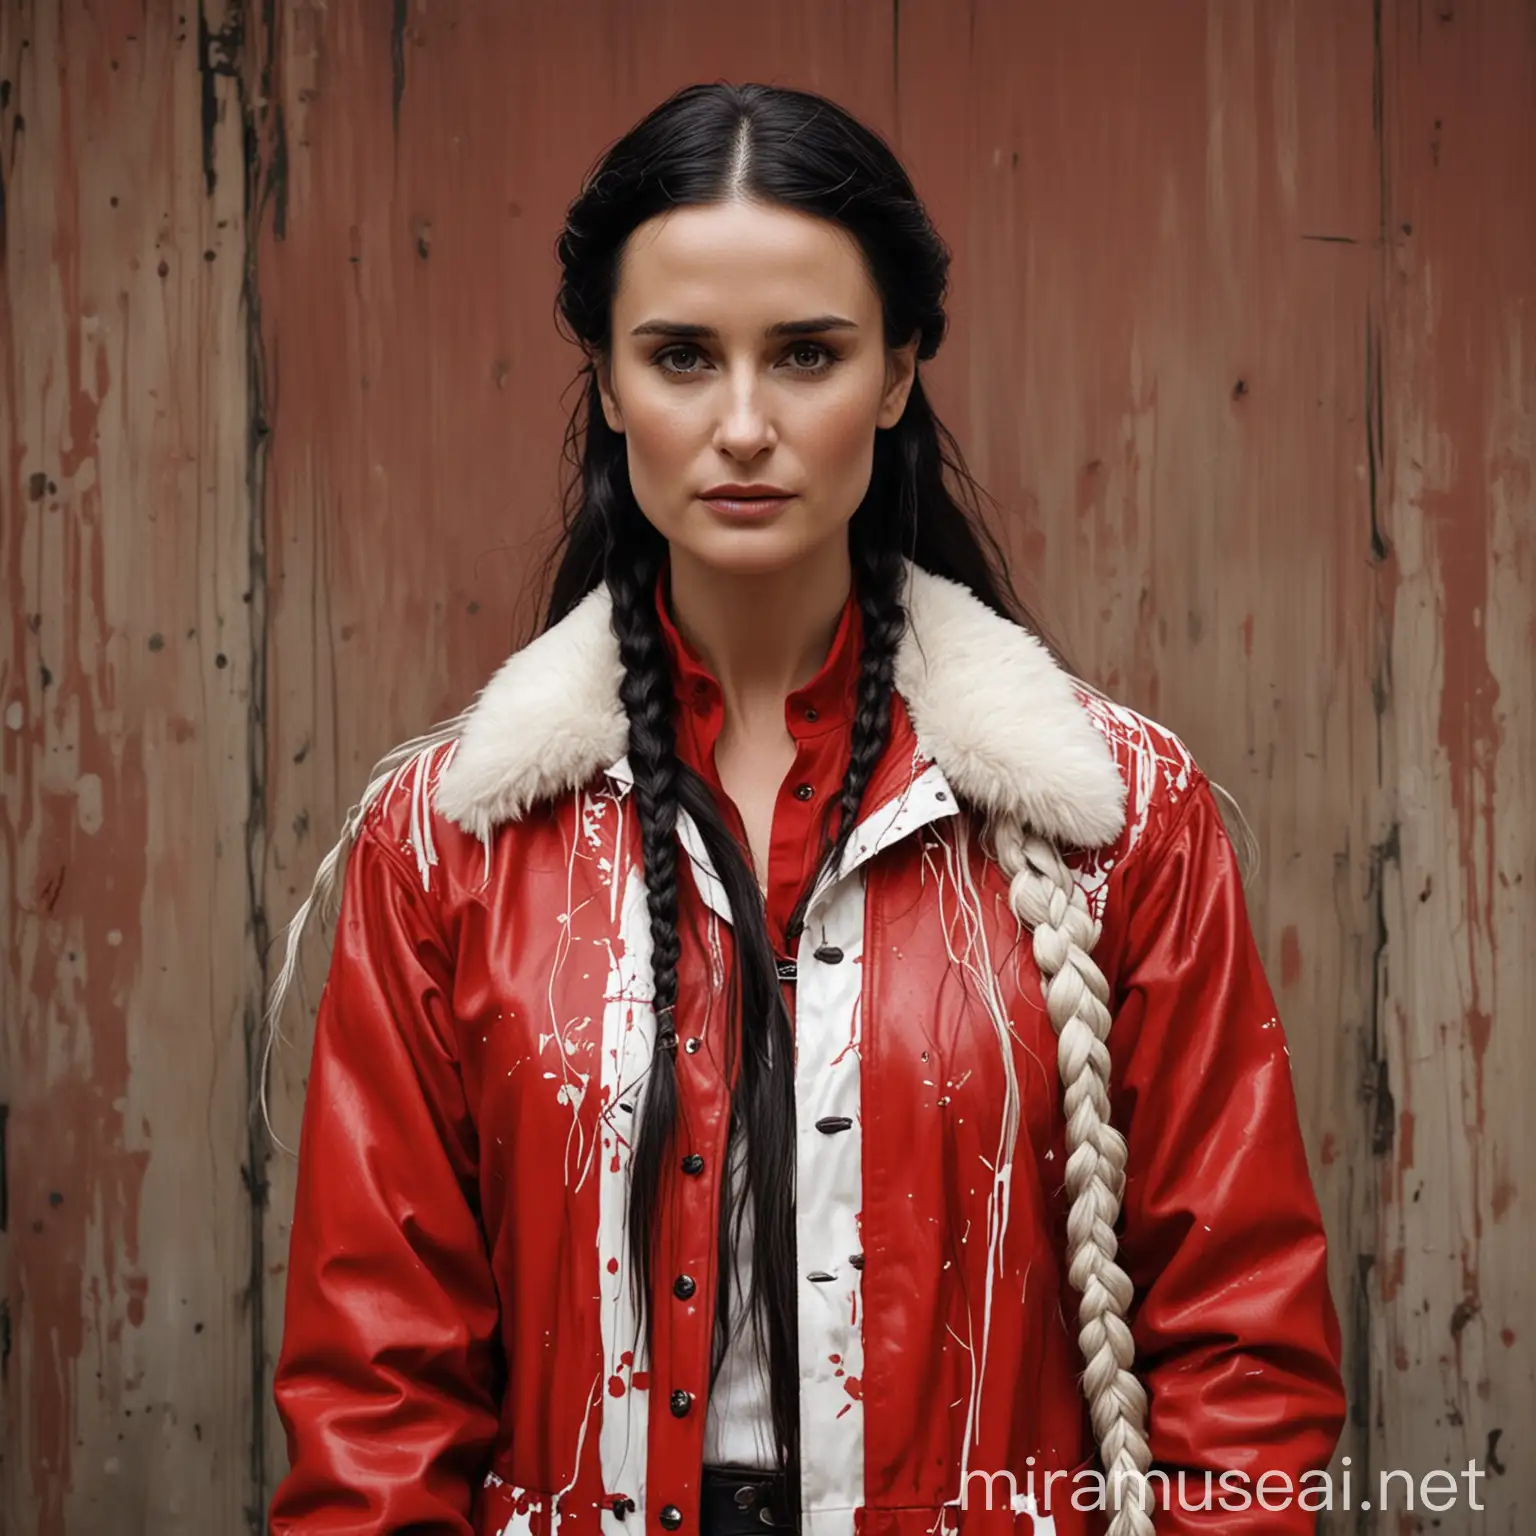 Emotionally Charged Portrait Demi Moore in Rustic Futurism Style